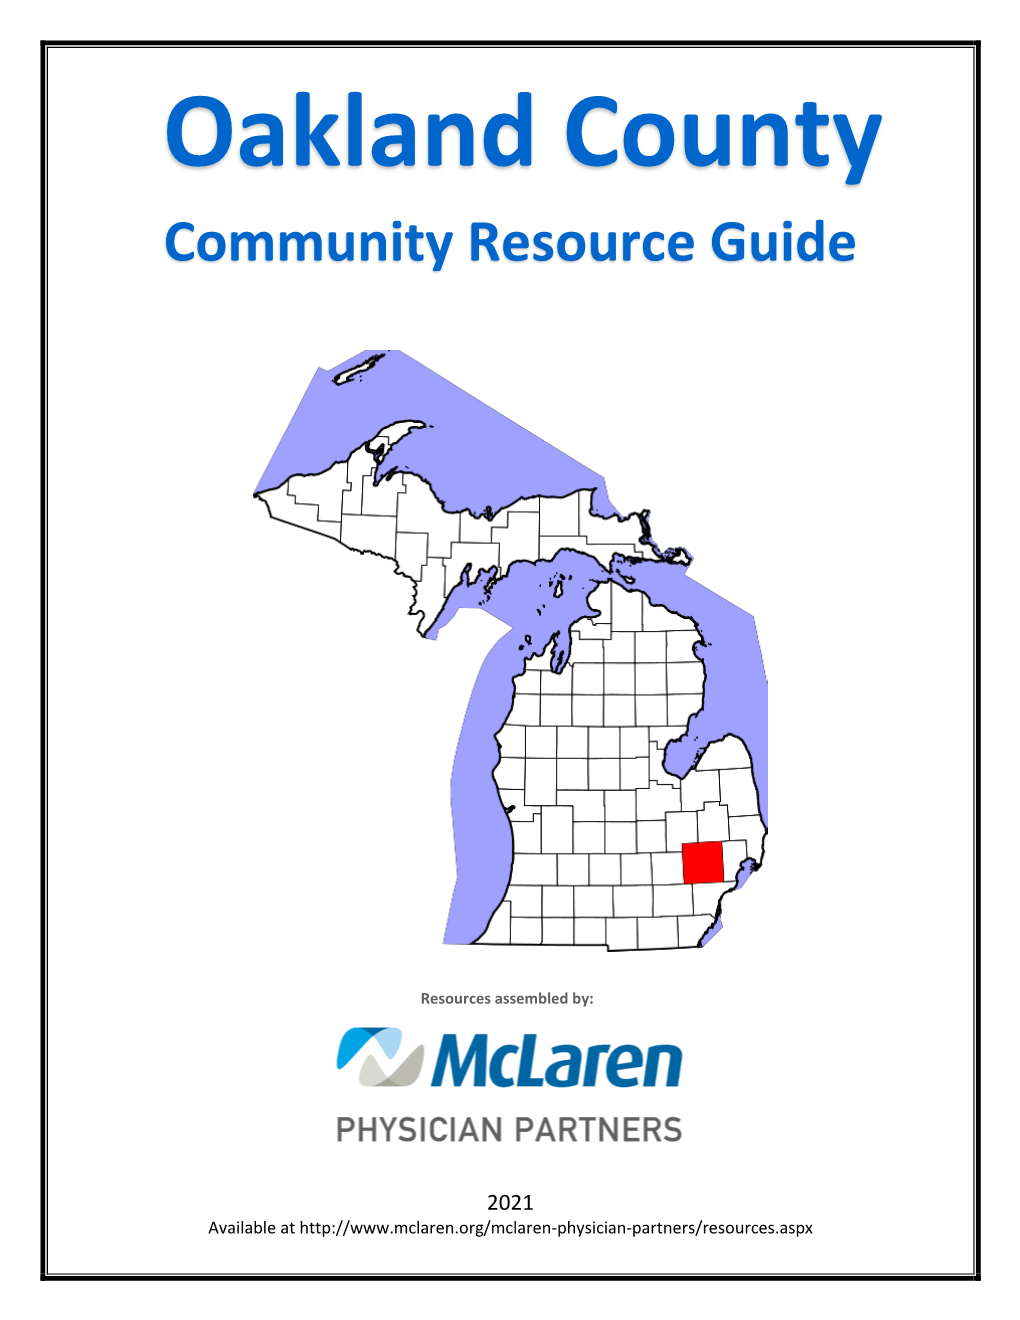 Oakland County Community Resource Guide